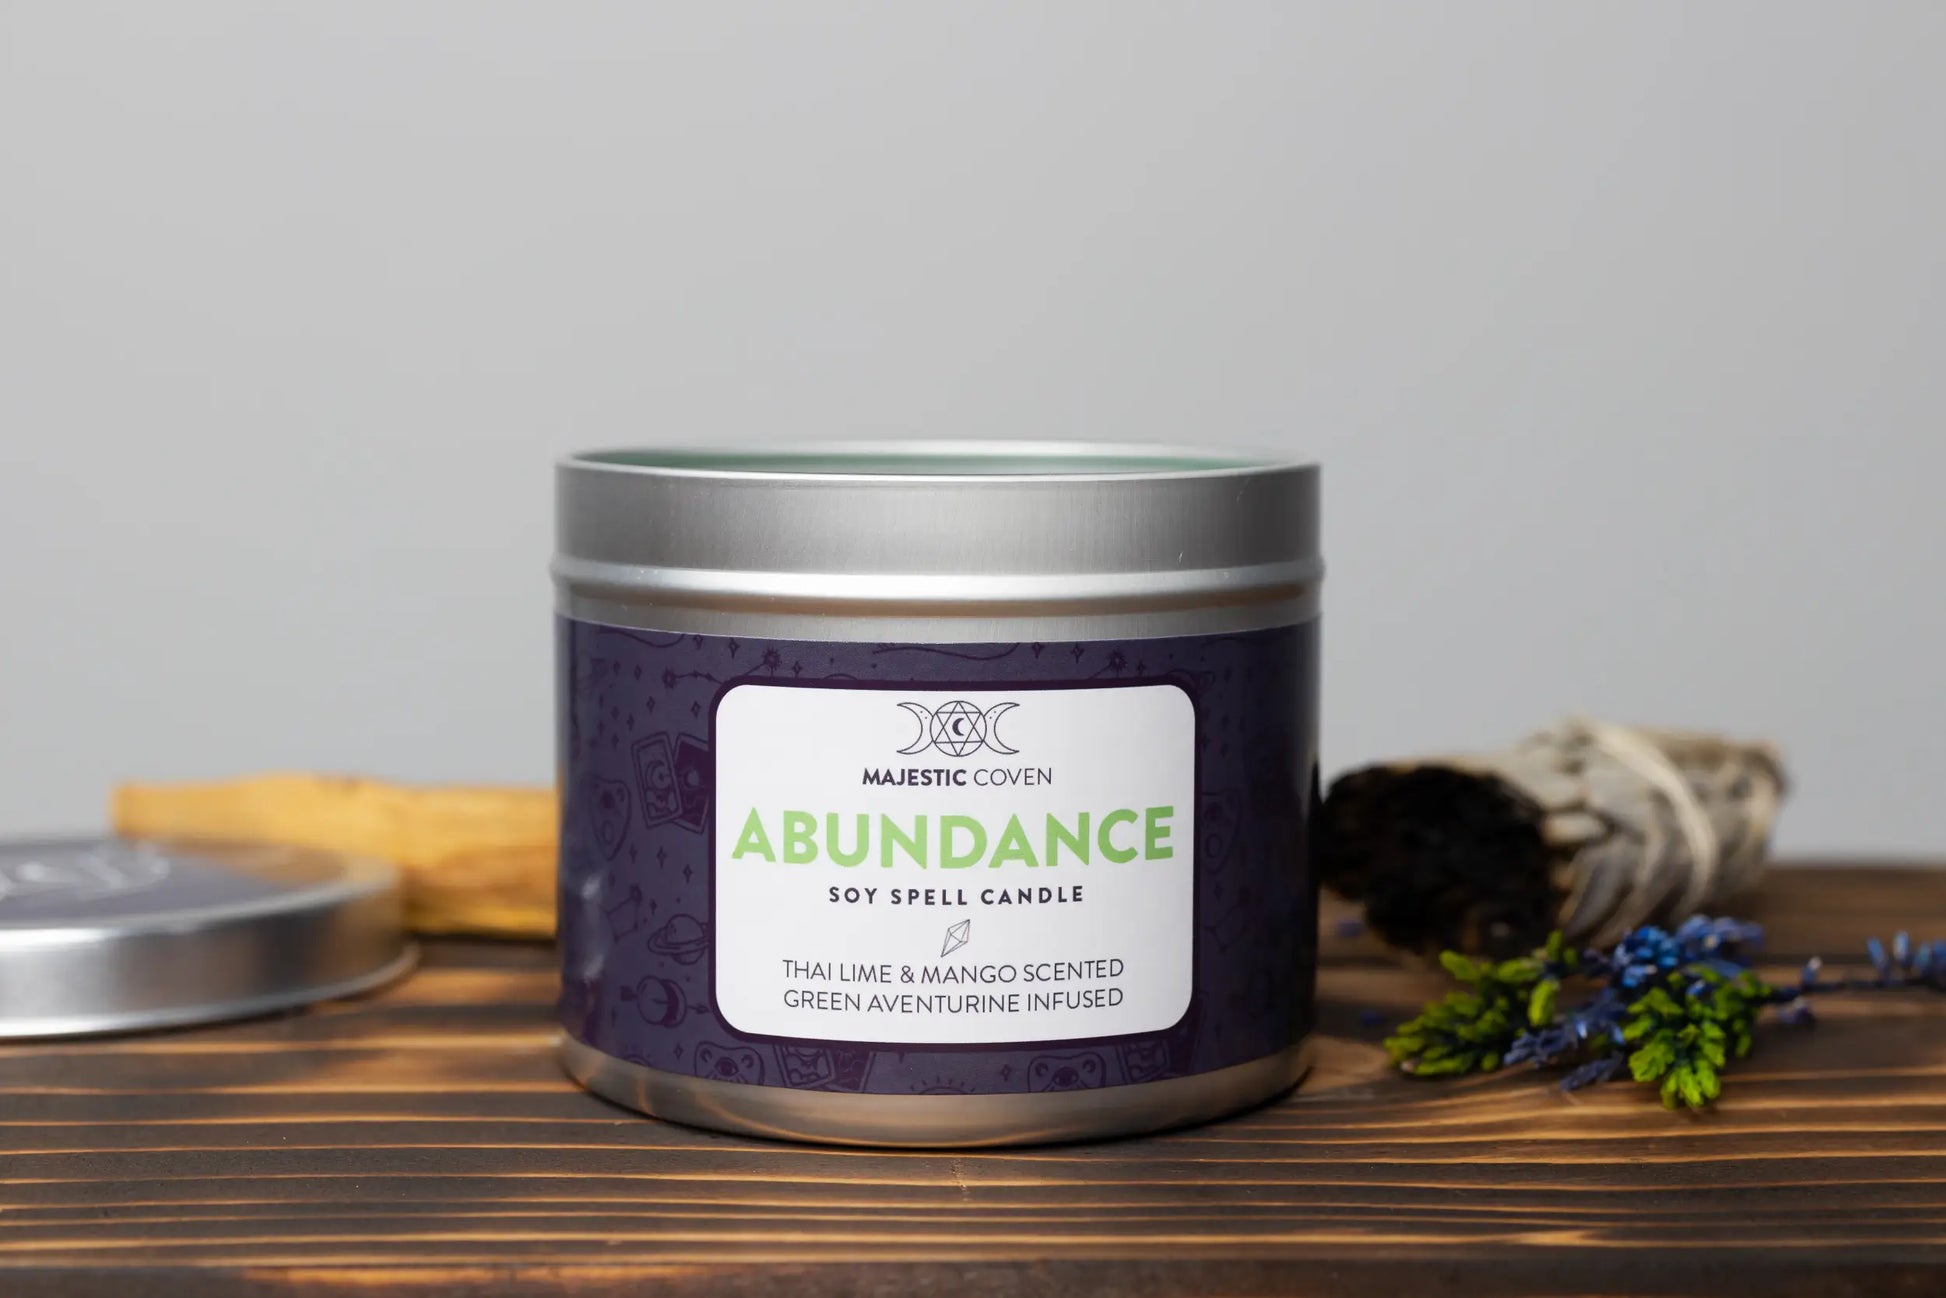 Abundance - Green Aventurine Infused Crystal Soy Candle - Spellbound